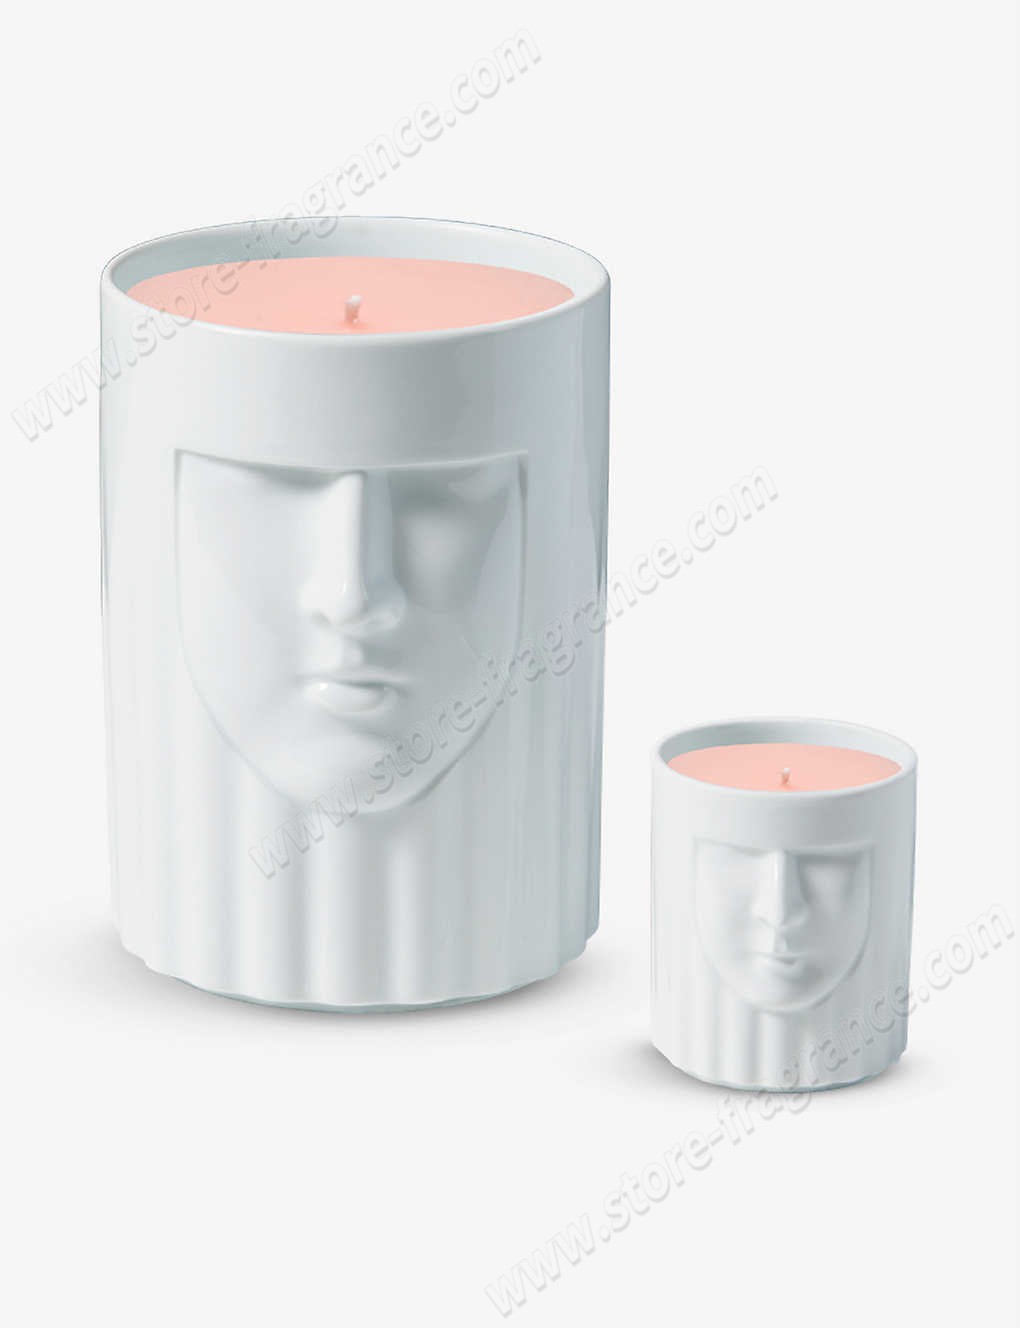 GINORI 1735/The Lady Orange Renaissance small scented candle set of two ✿ Discount Store - GINORI 1735/The Lady Orange Renaissance small scented candle set of two ✿ Discount Store